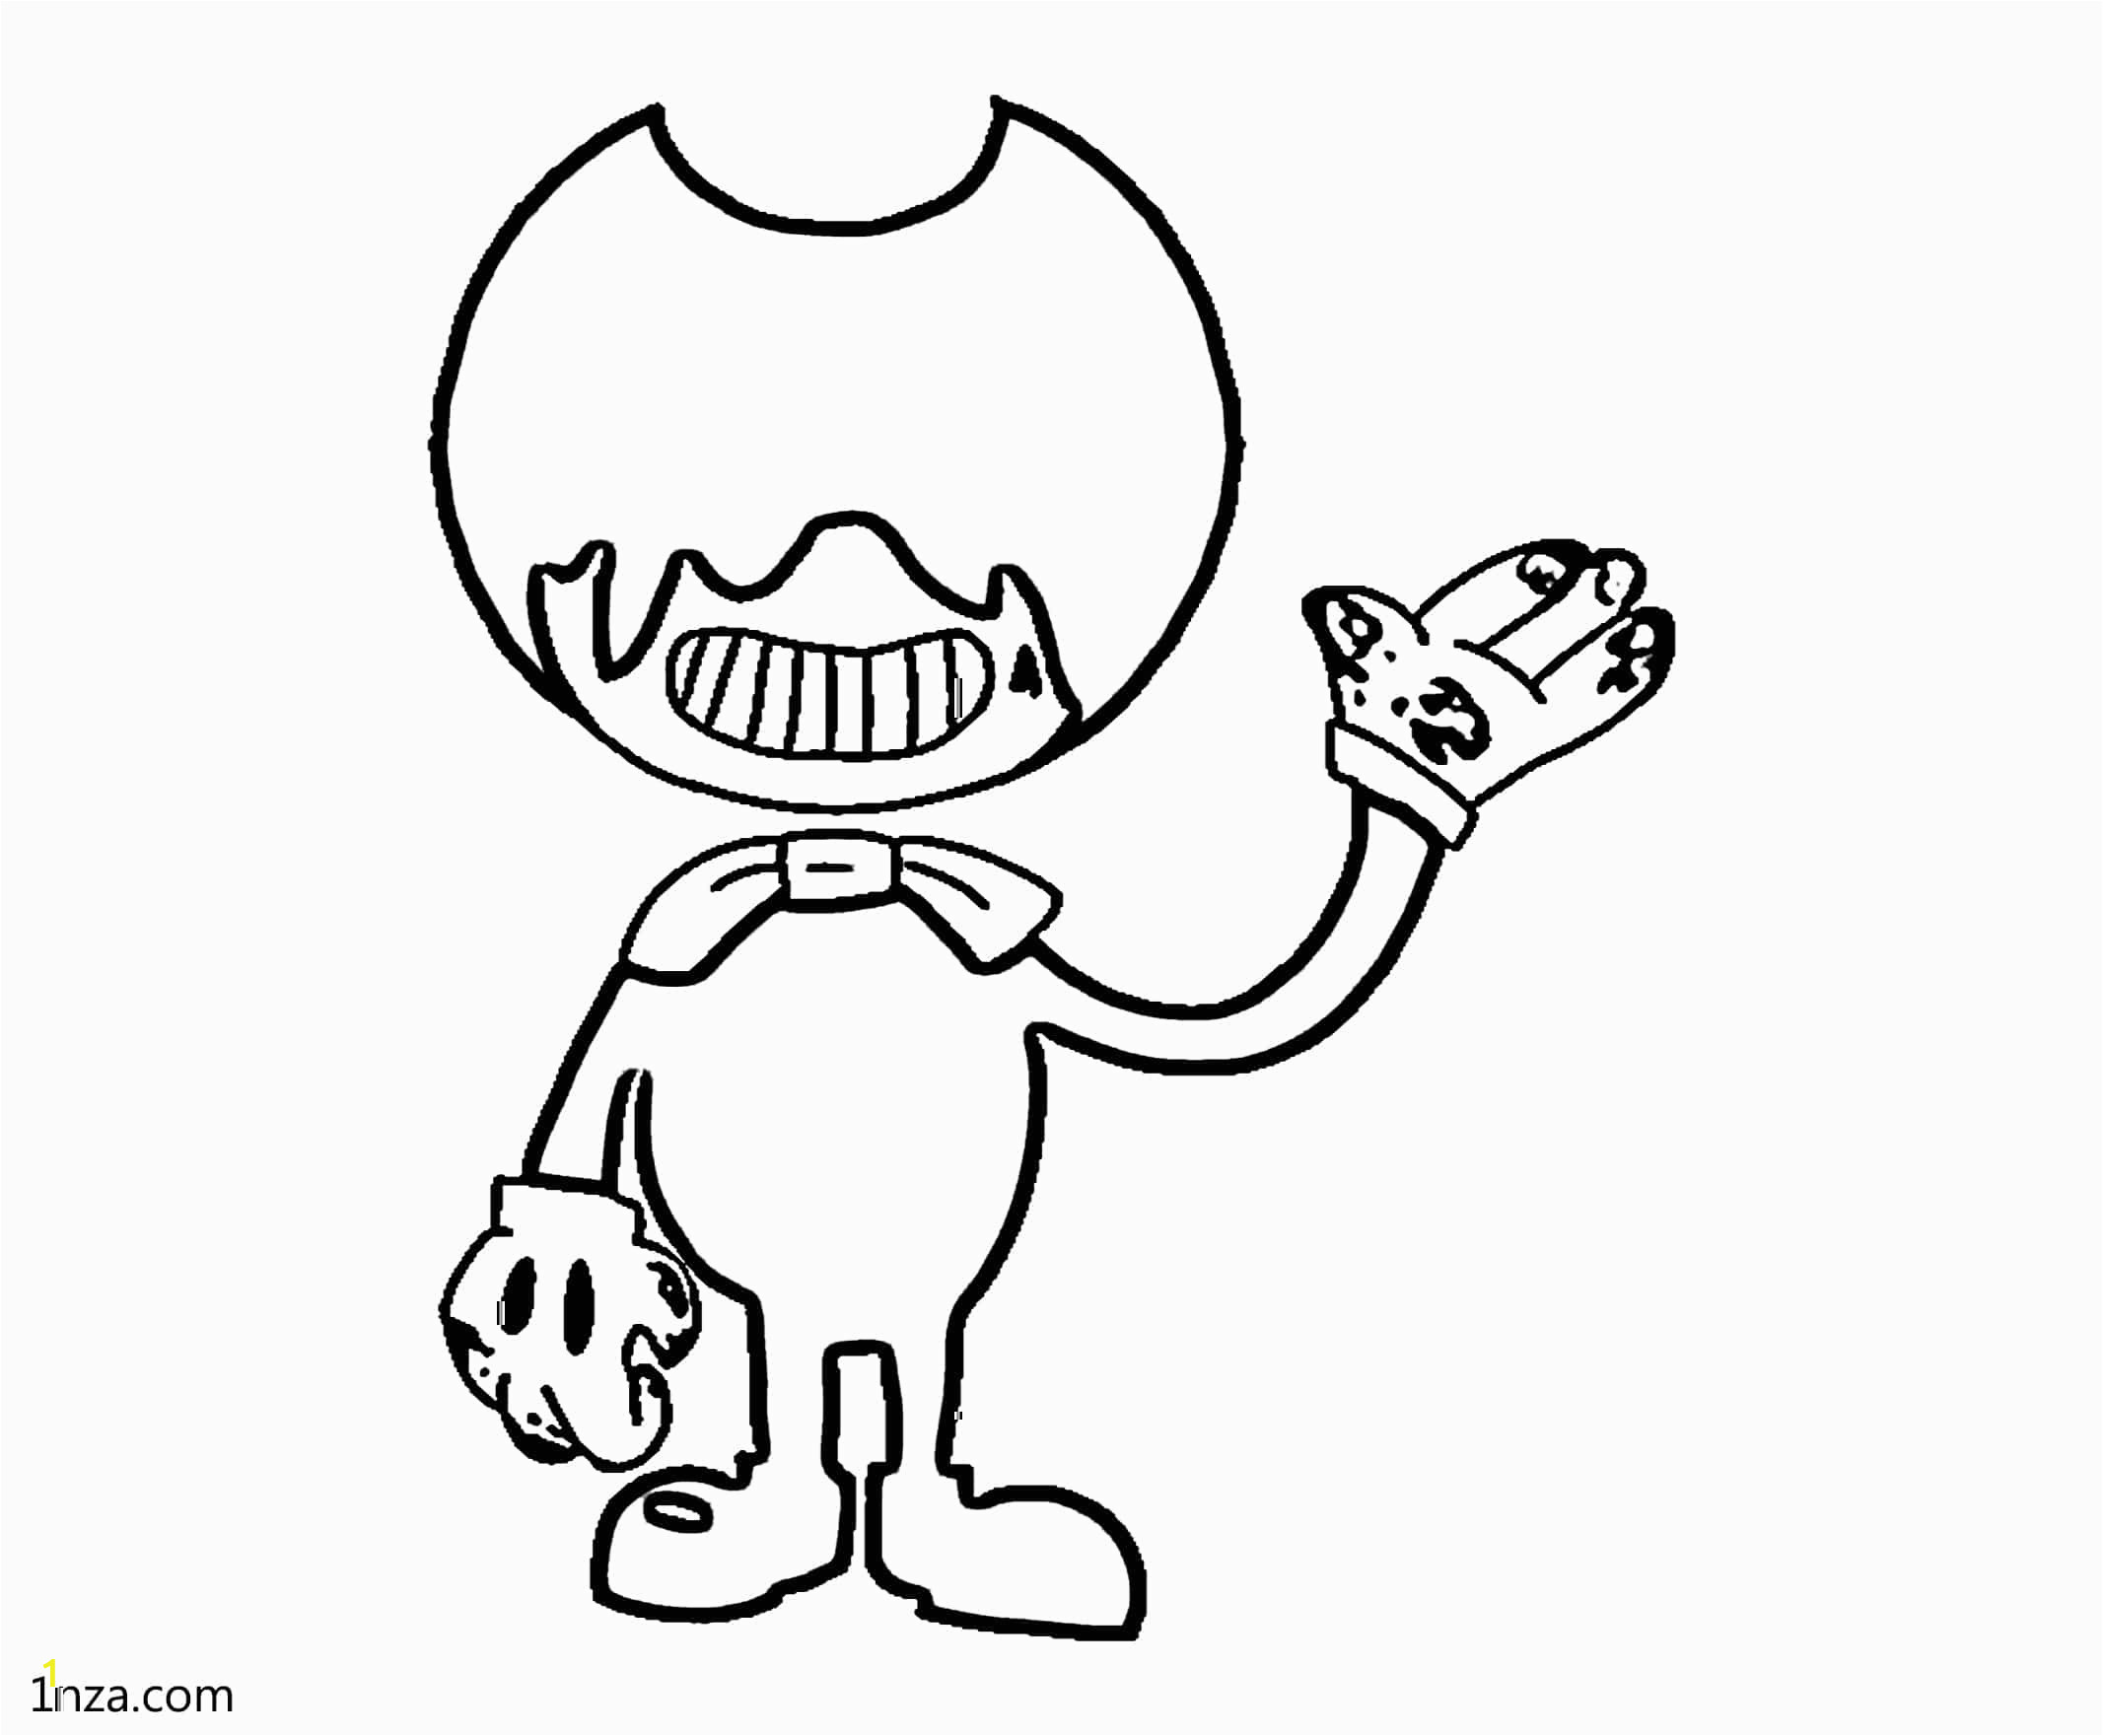 Boris Bendy and the Ink Machine Coloring Pages 12 Most Mean Free Printable Bendy Coloring Pages Ink